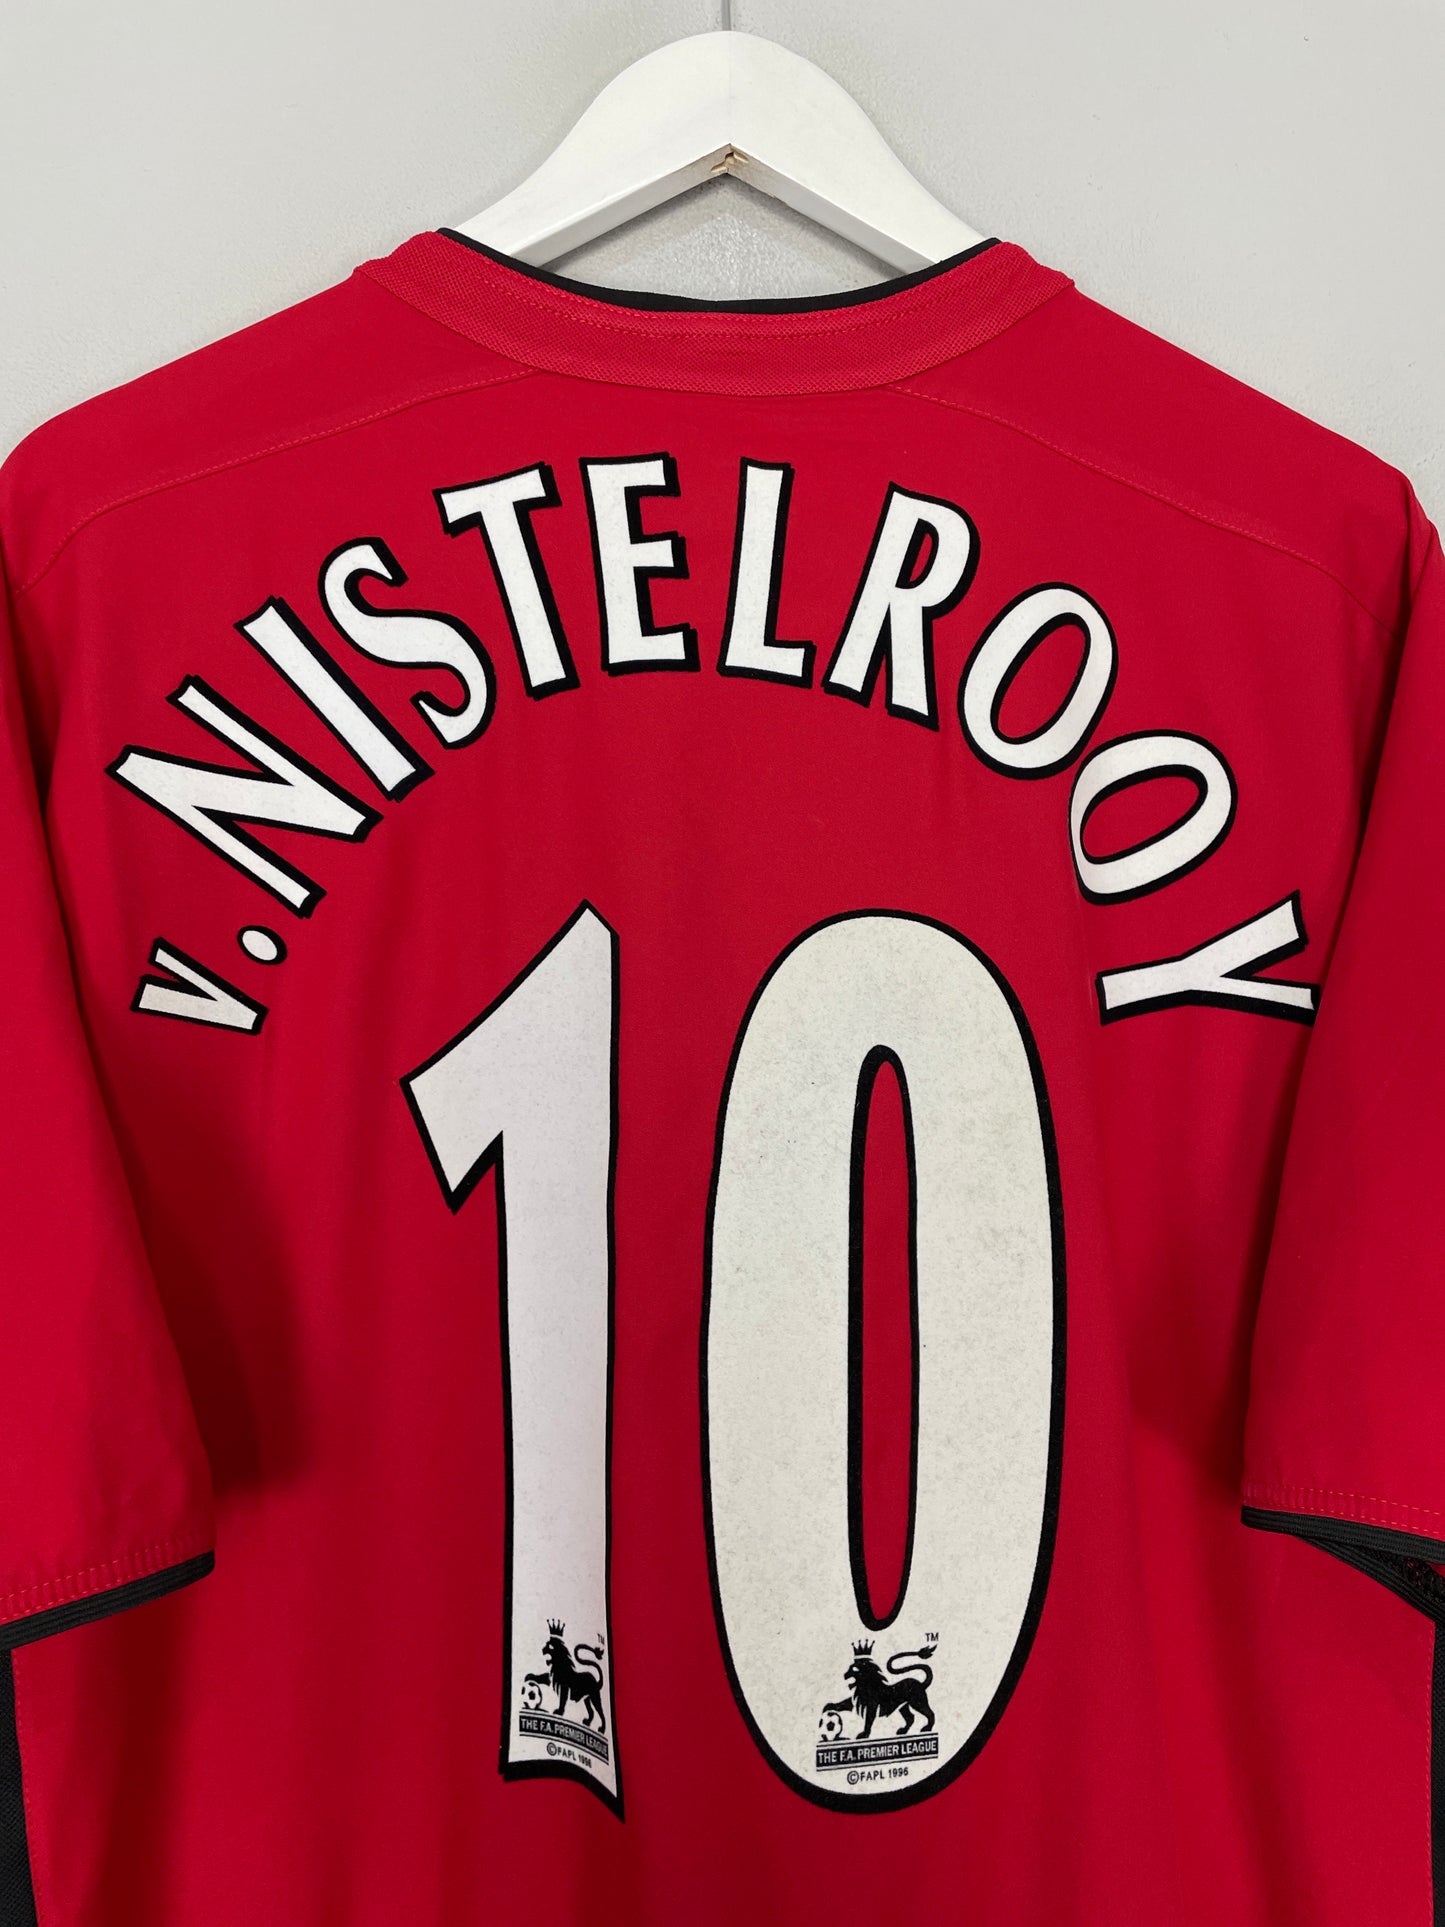 2002/04 MANCHESTER UNITED V.NISTELROOY #10 HOME SHIRT (XL) NIKE